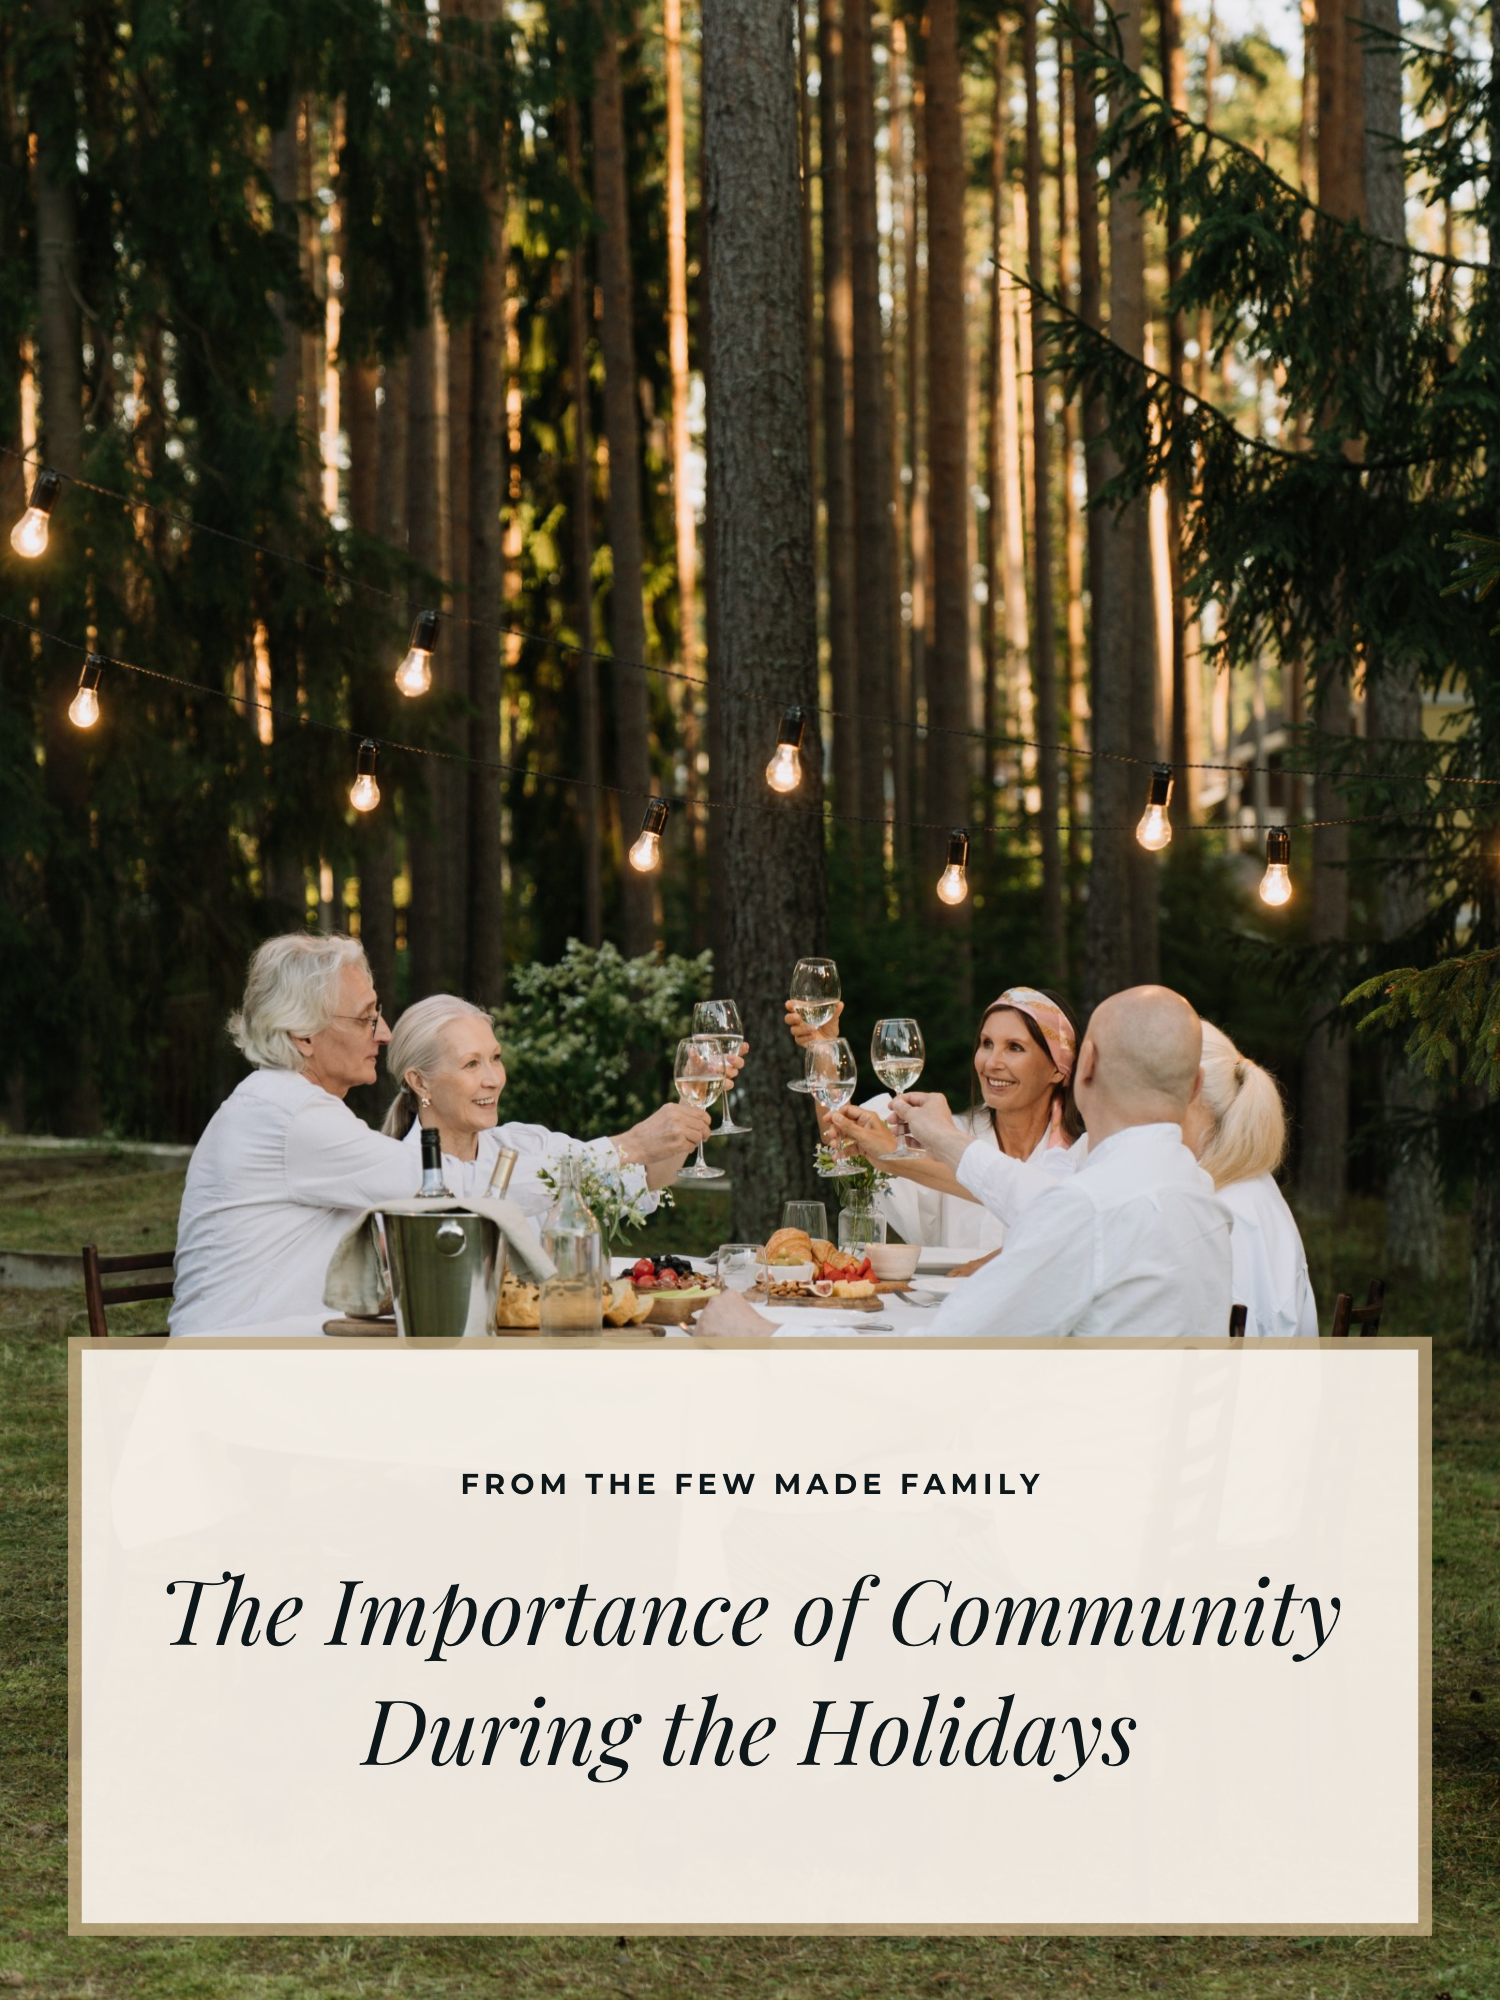 The Importance of Community During the Holidays